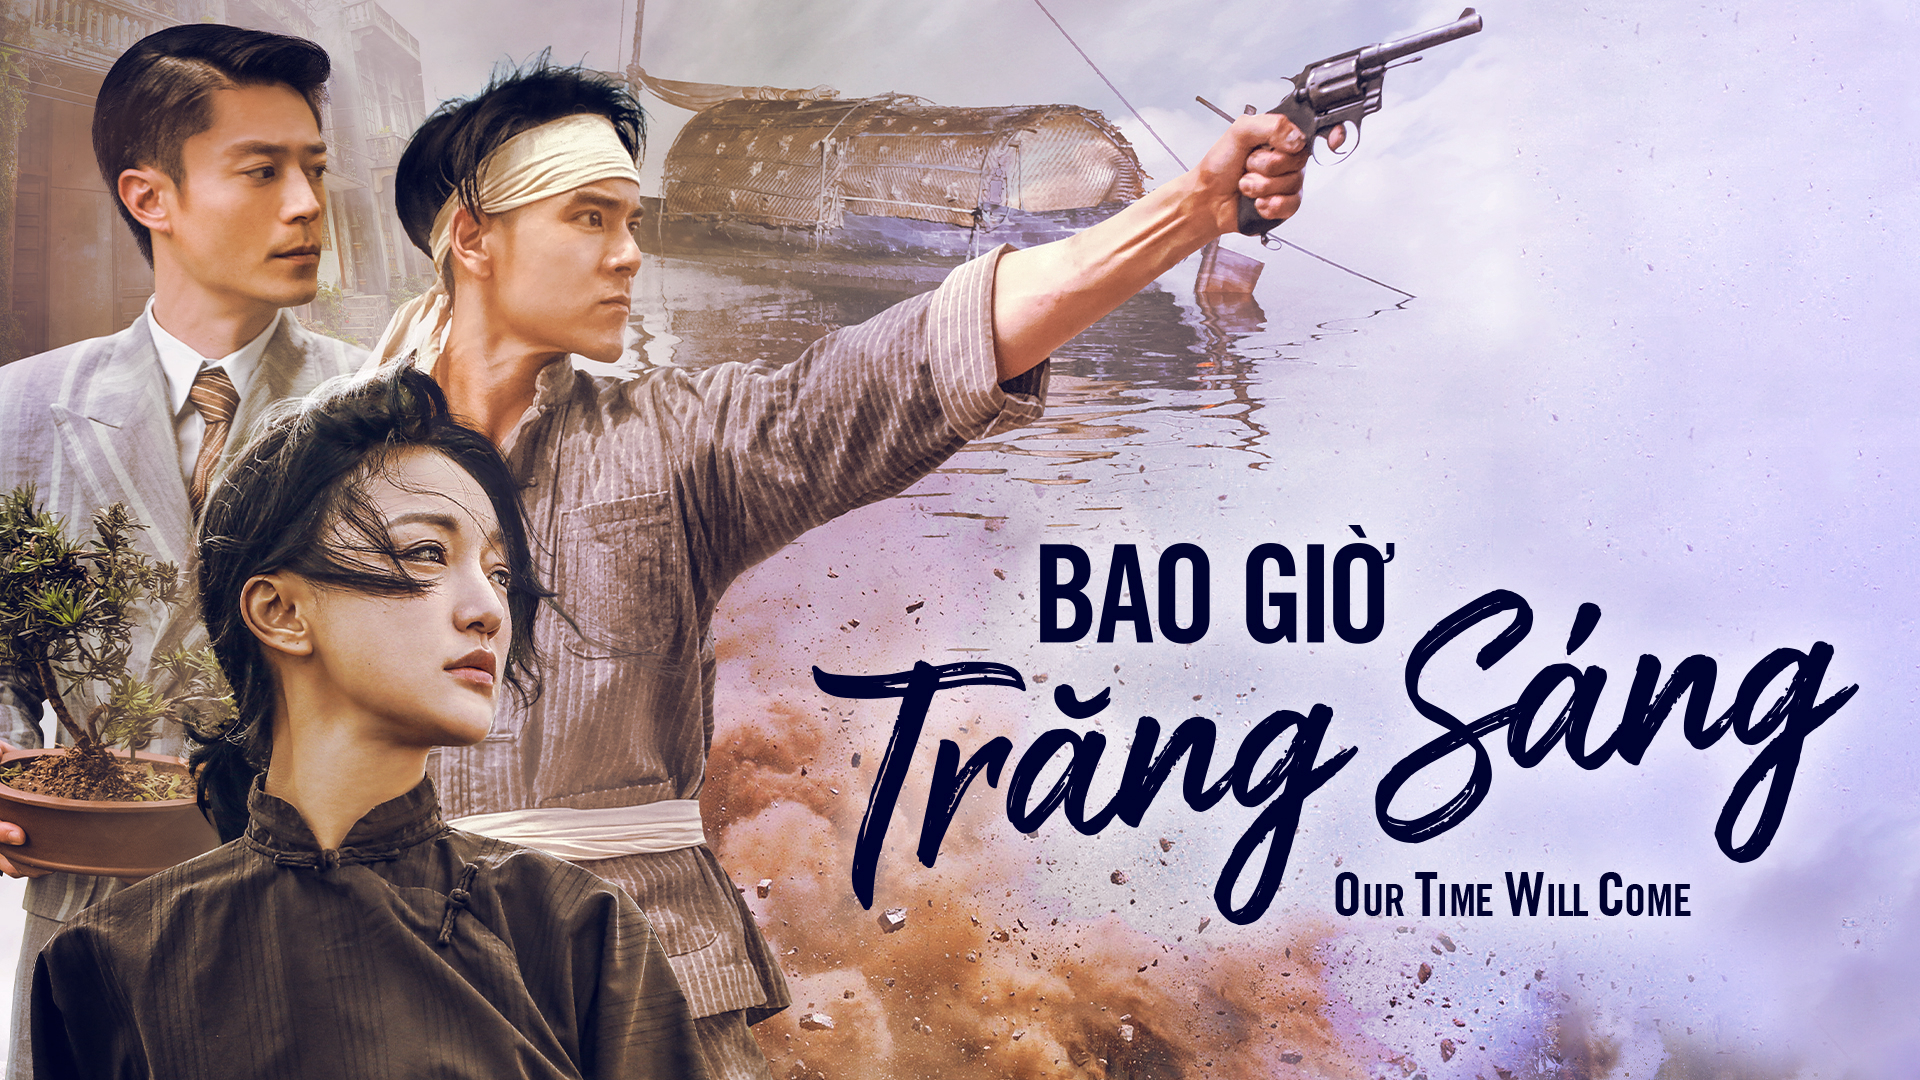 Bao Giờ Trăng Sáng Our Time Will Come